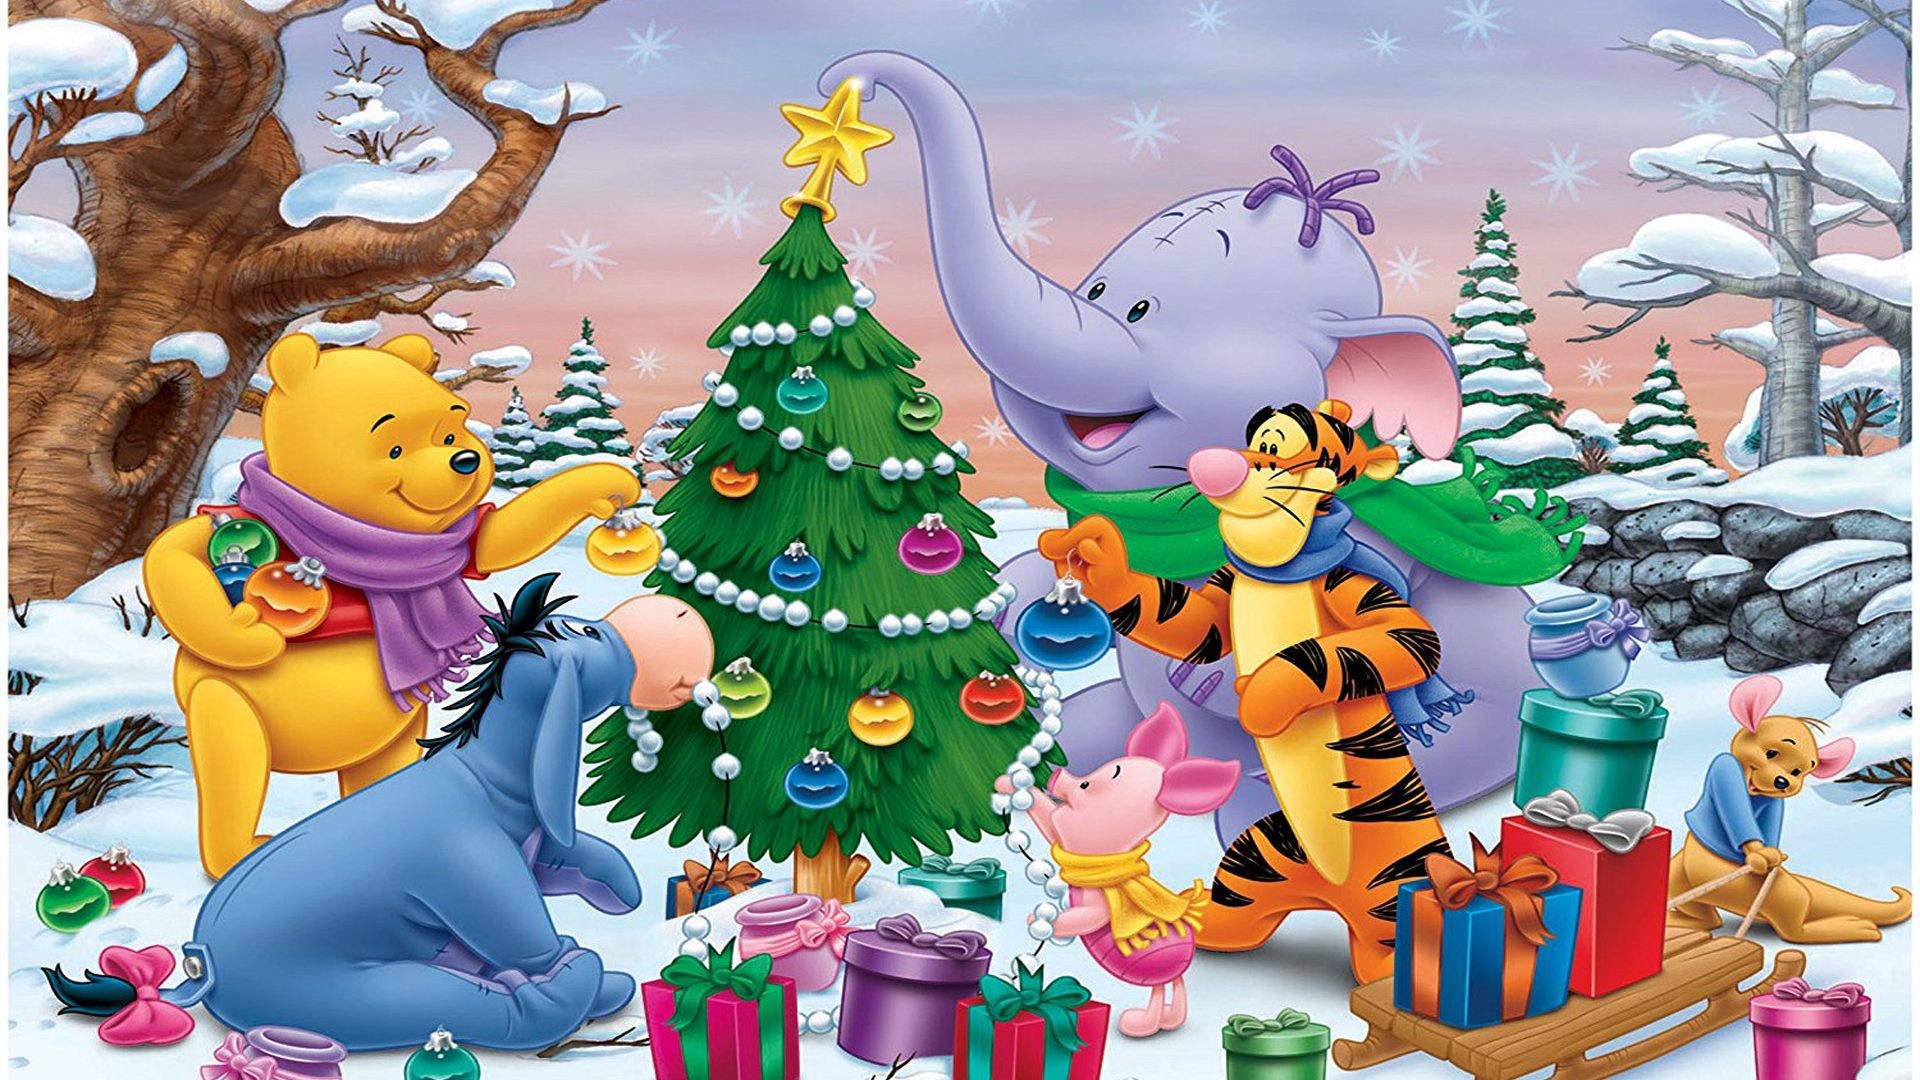 Winnie the Pooh Christmas Wallpaper (46+ images)